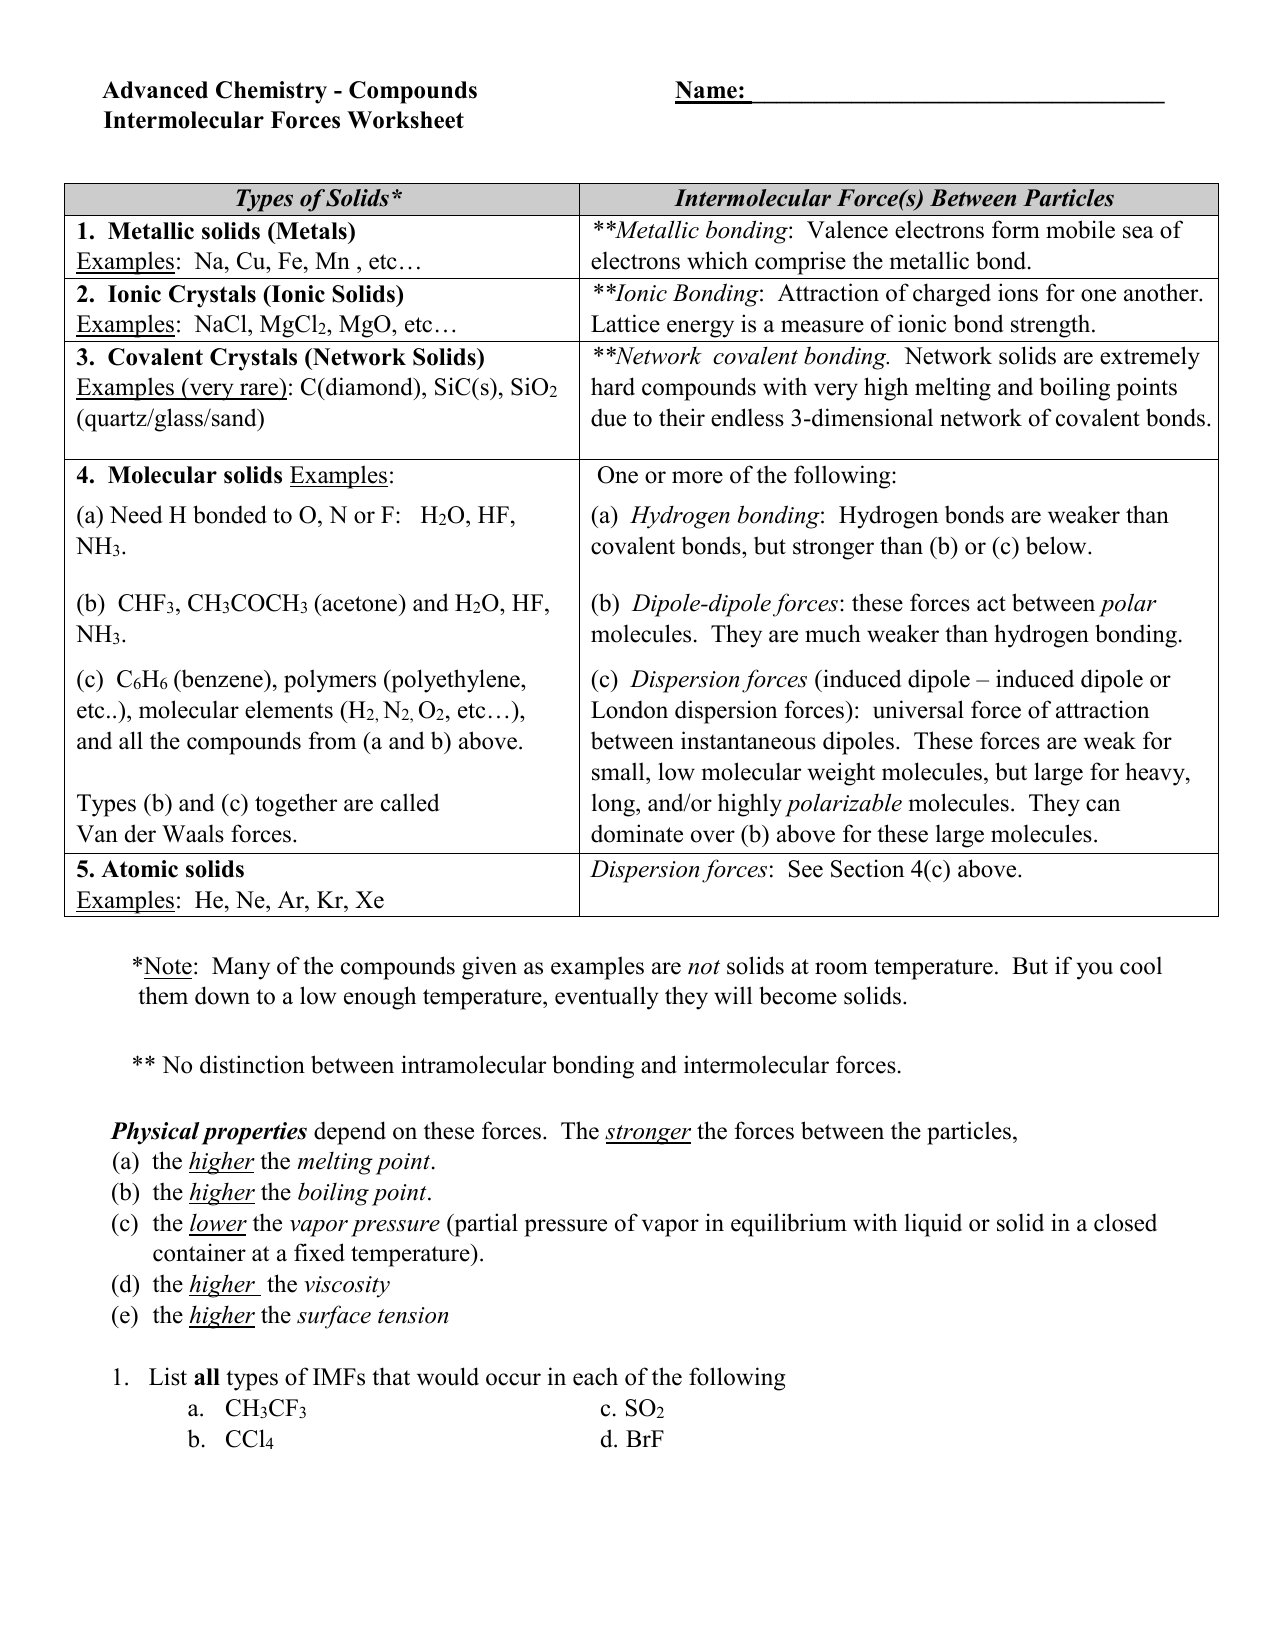 Chemistry Unit 4 Compounds Intermolecular Forces Worksheet Answers